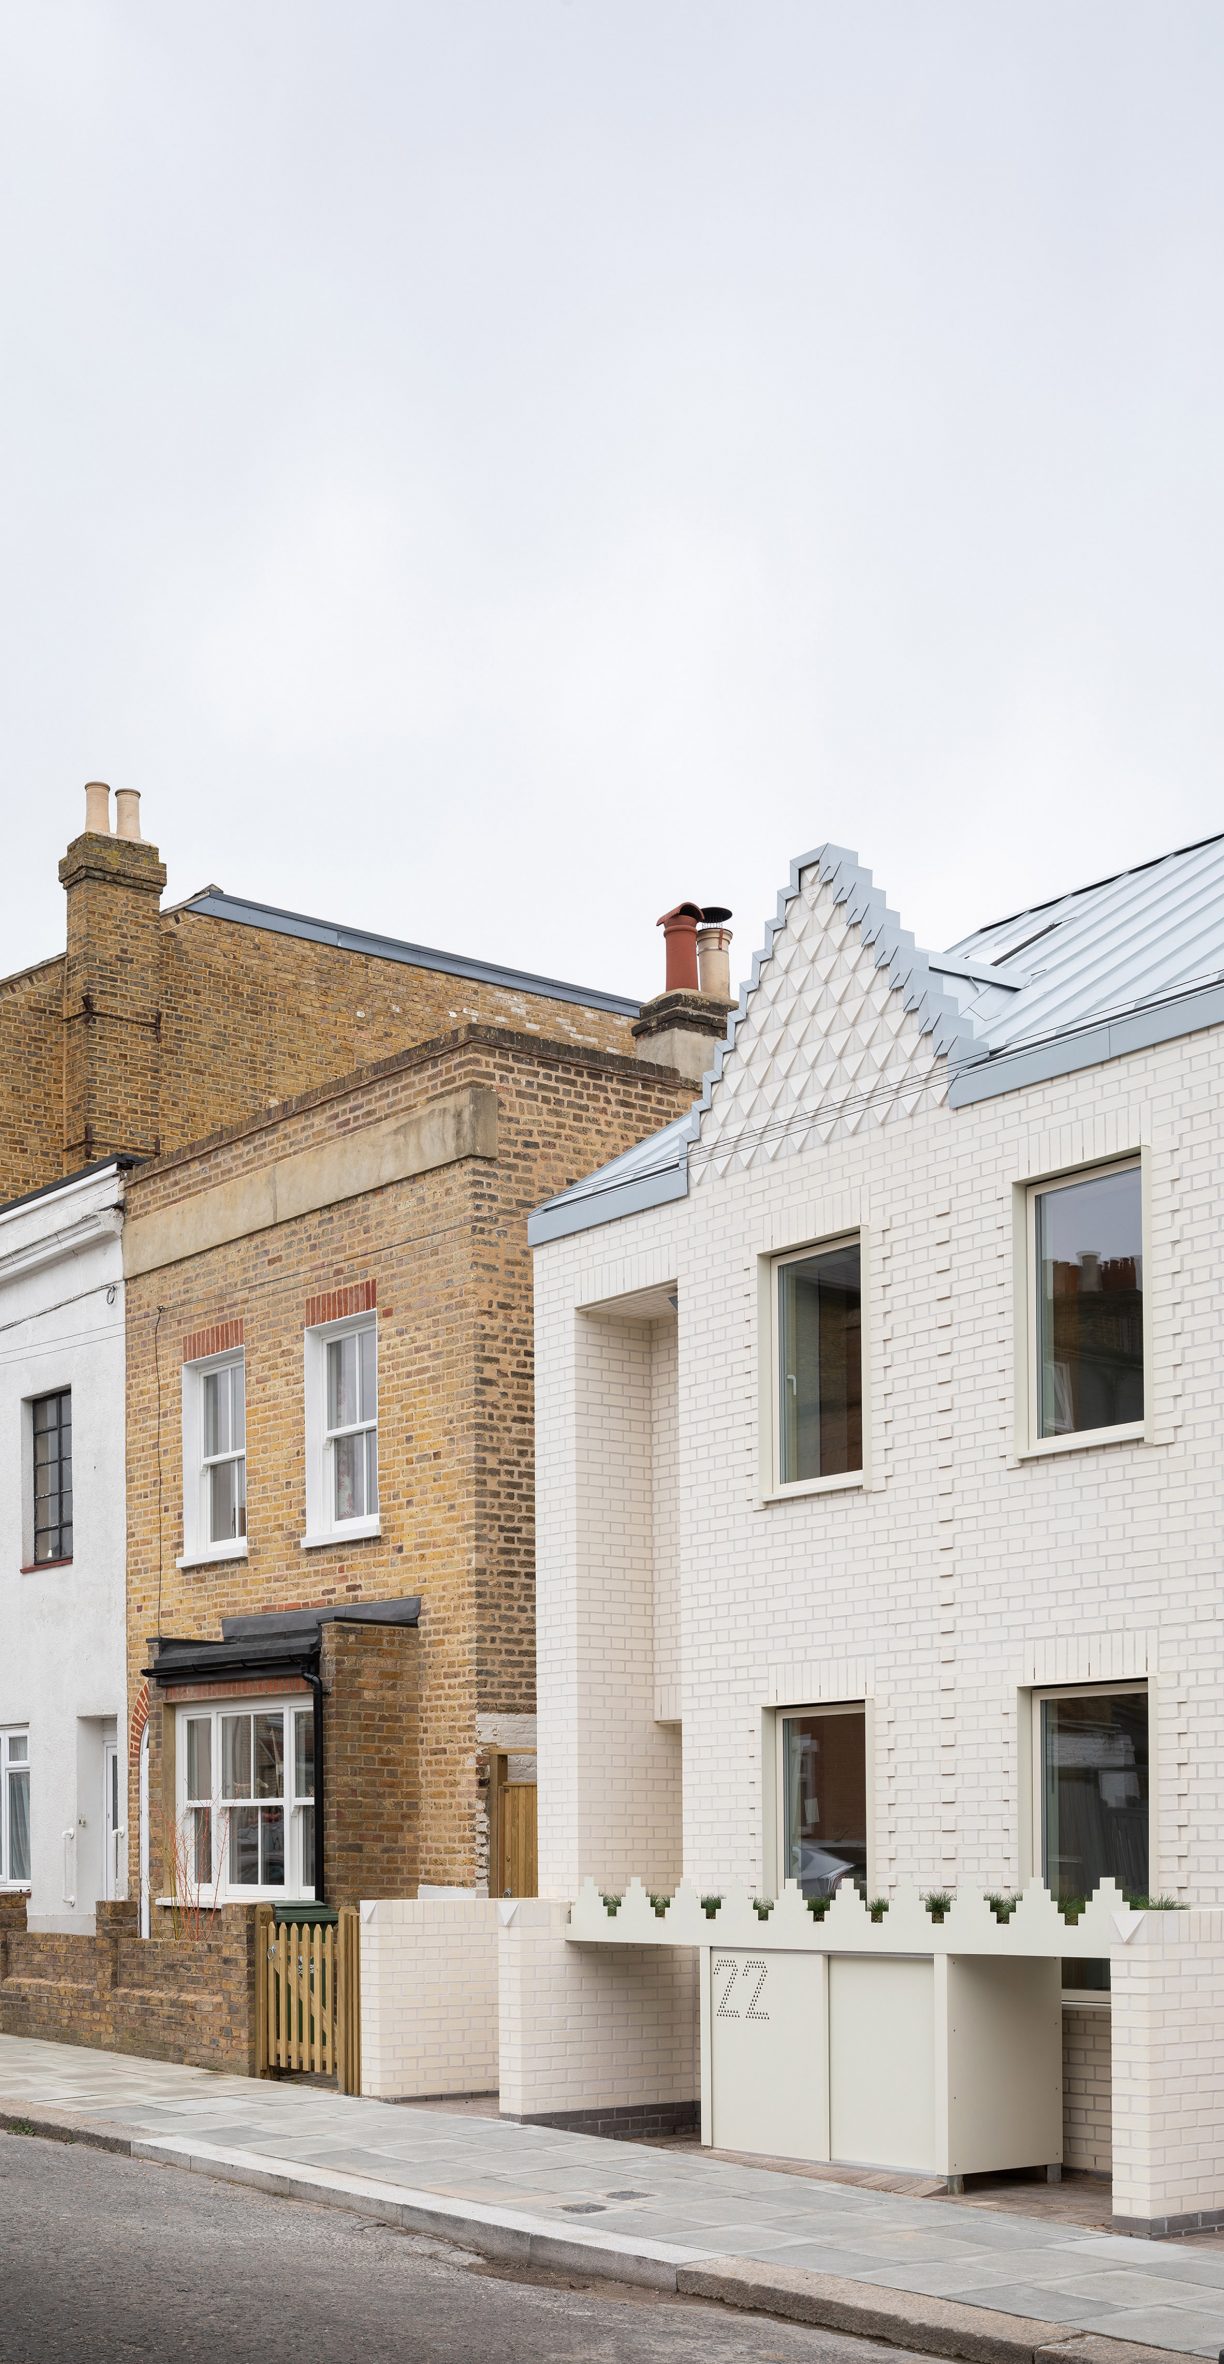 A row of terraced brick houses in London